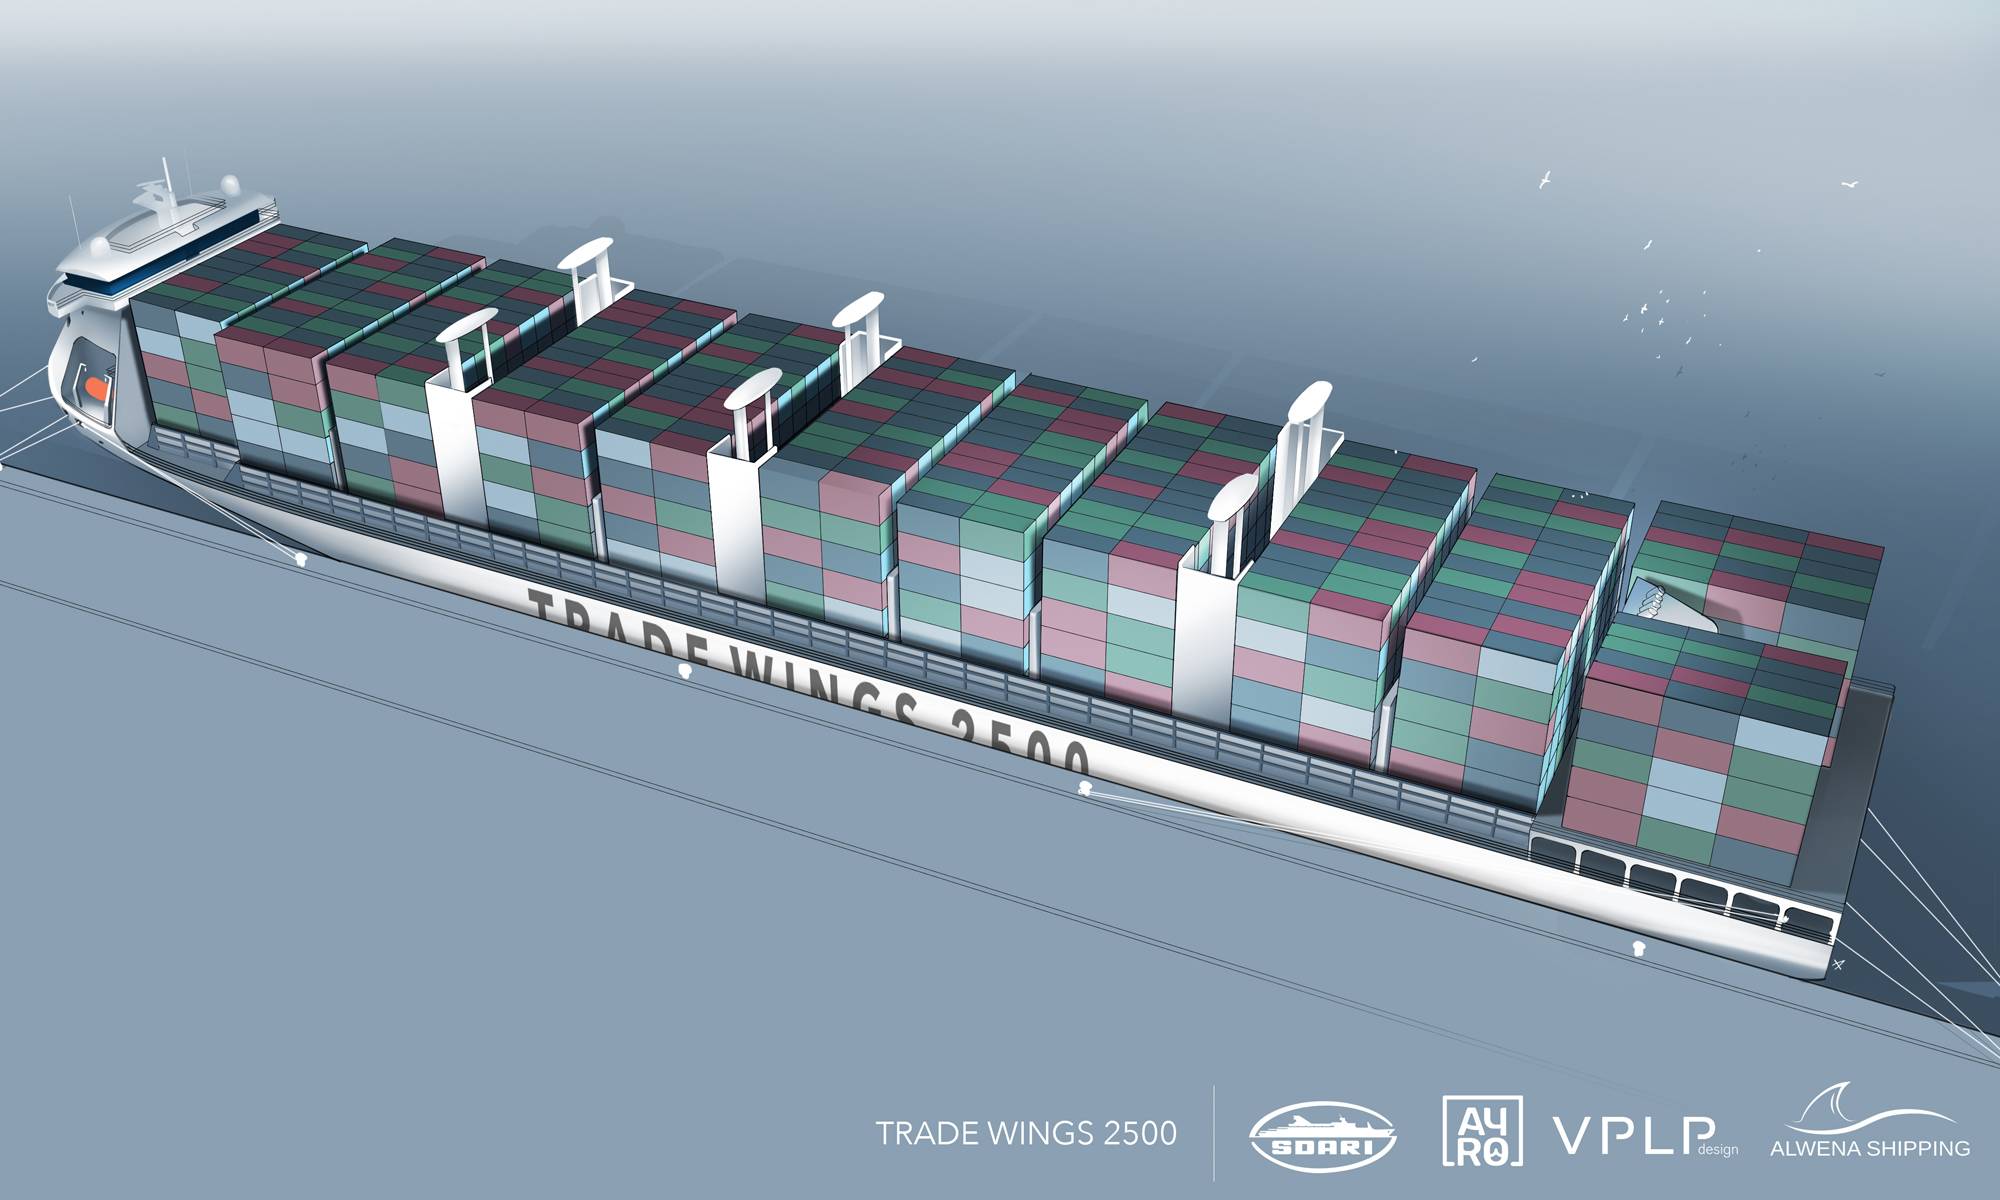 Påstået Levere Sult Wind Power: 'Trade Wings' Containership Design Gets BV